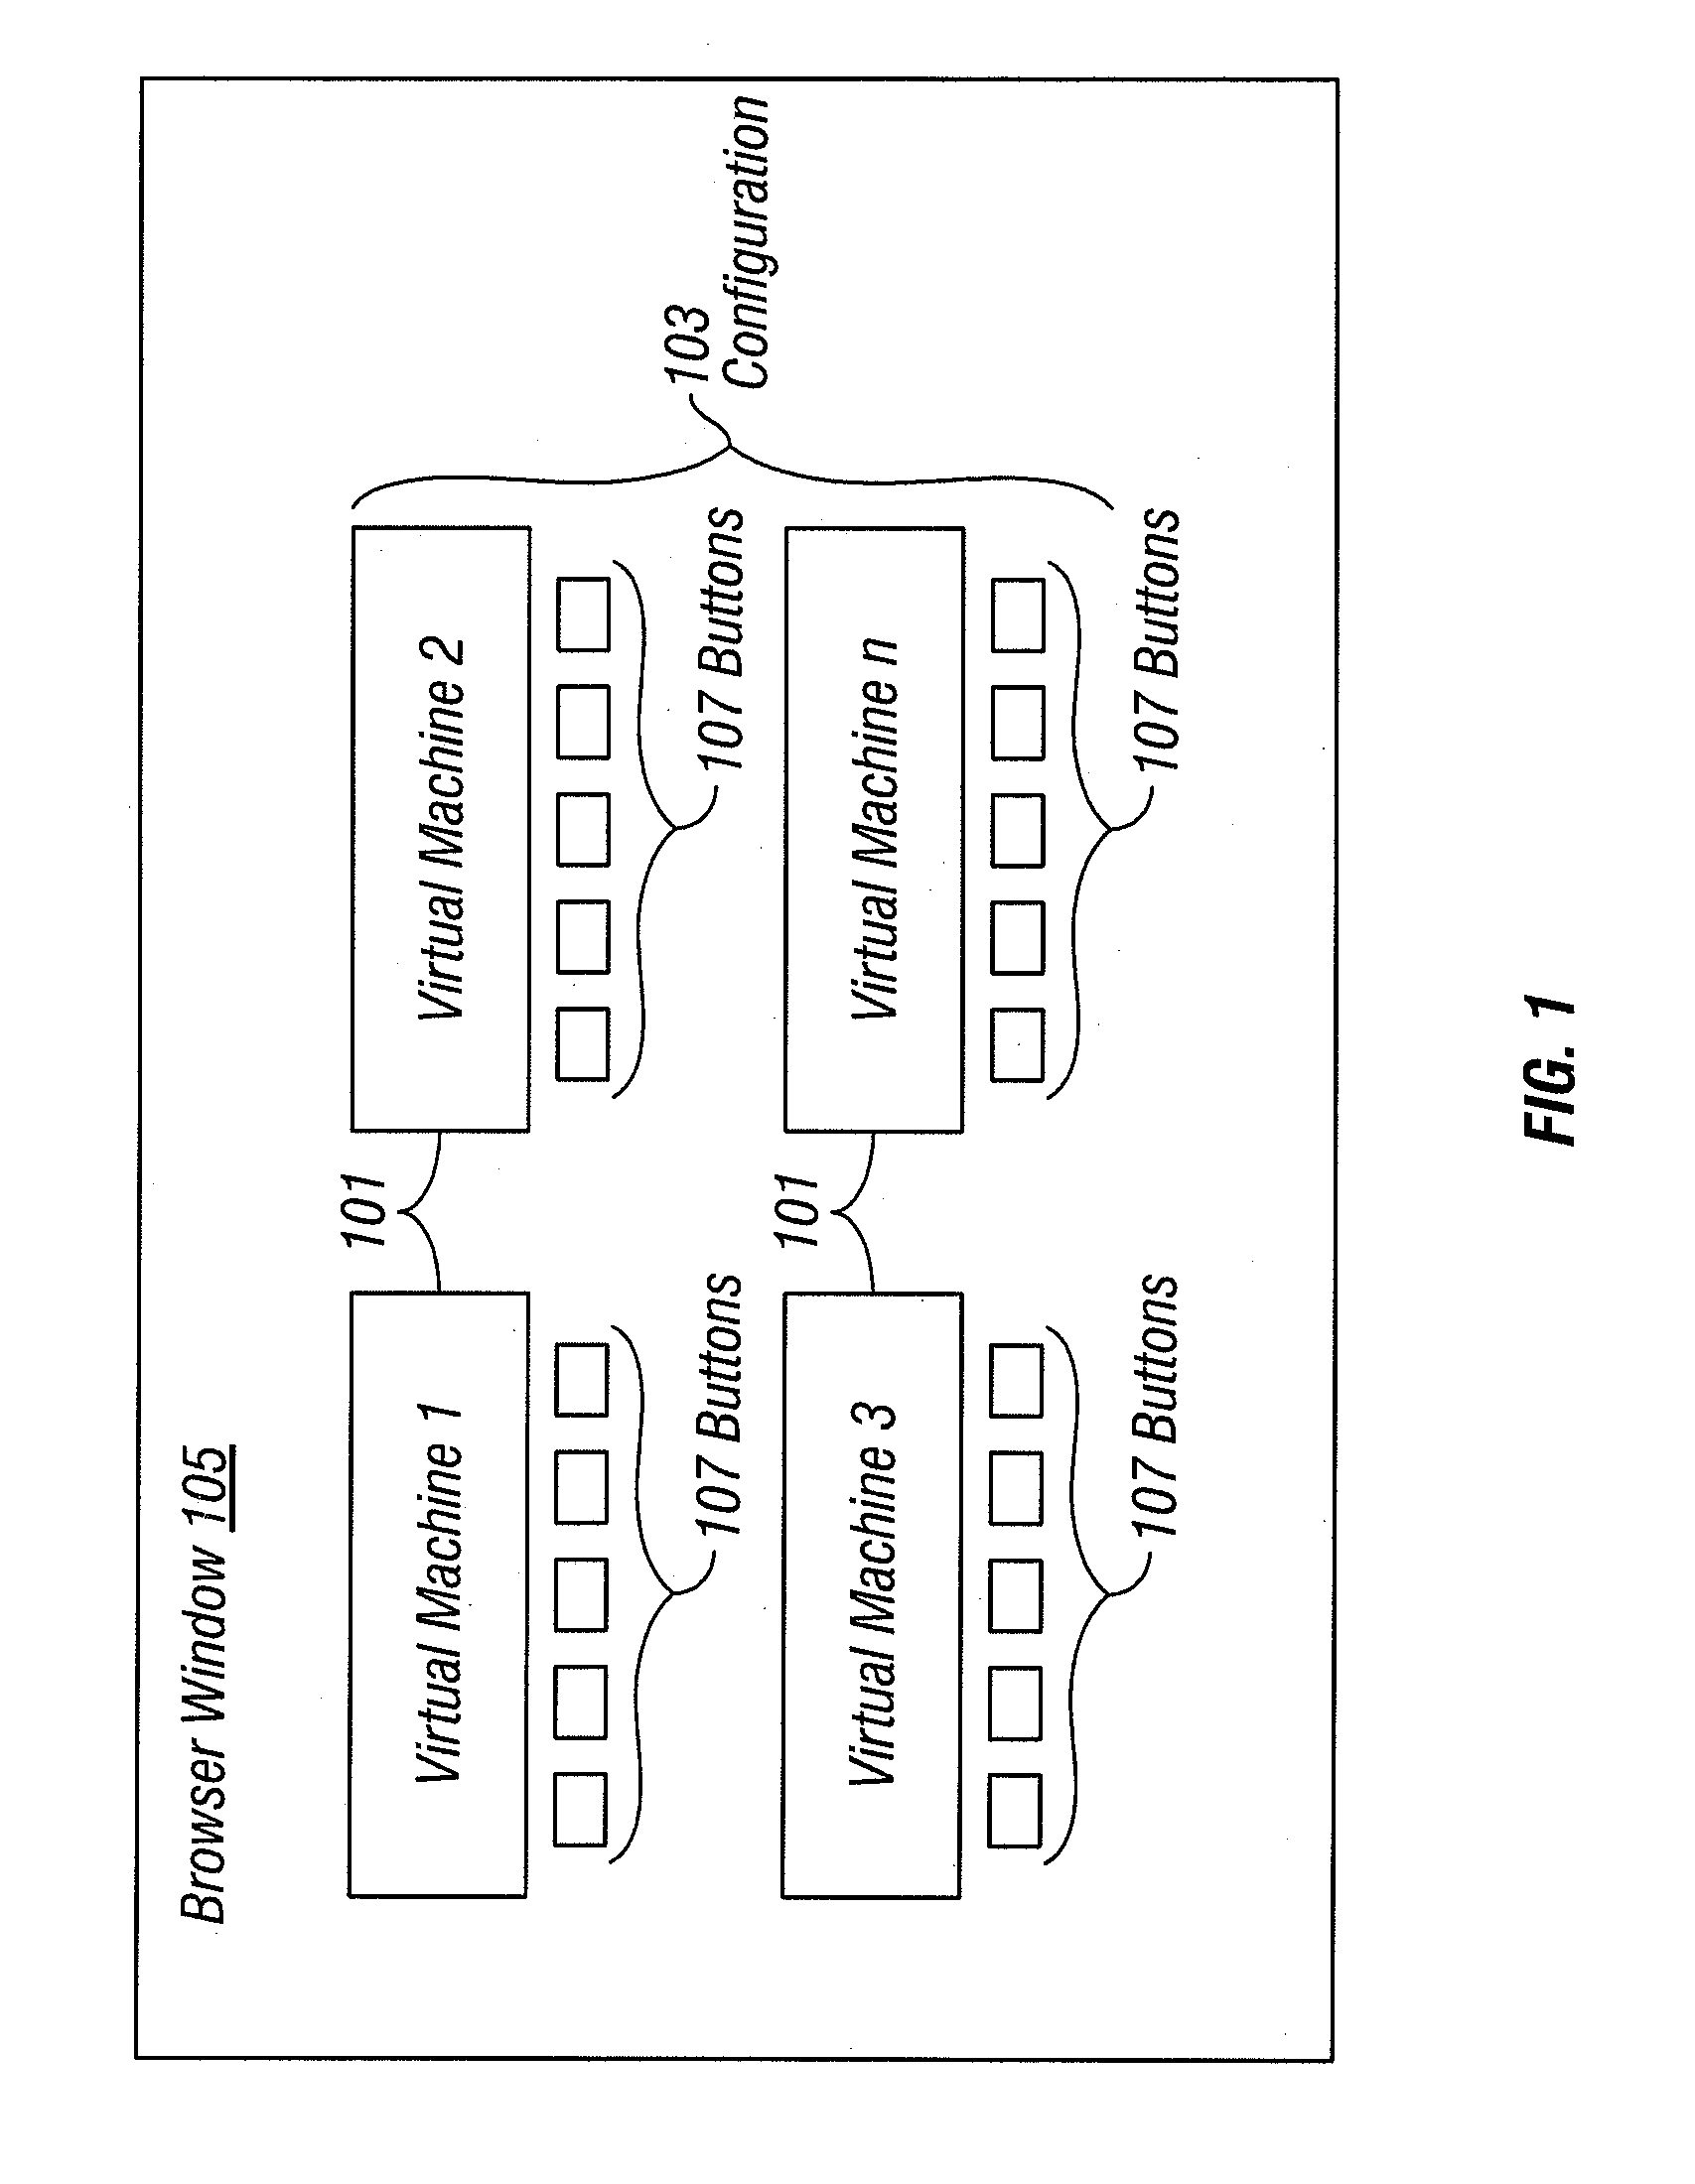 Multiple virtual machine consoles in a single interface